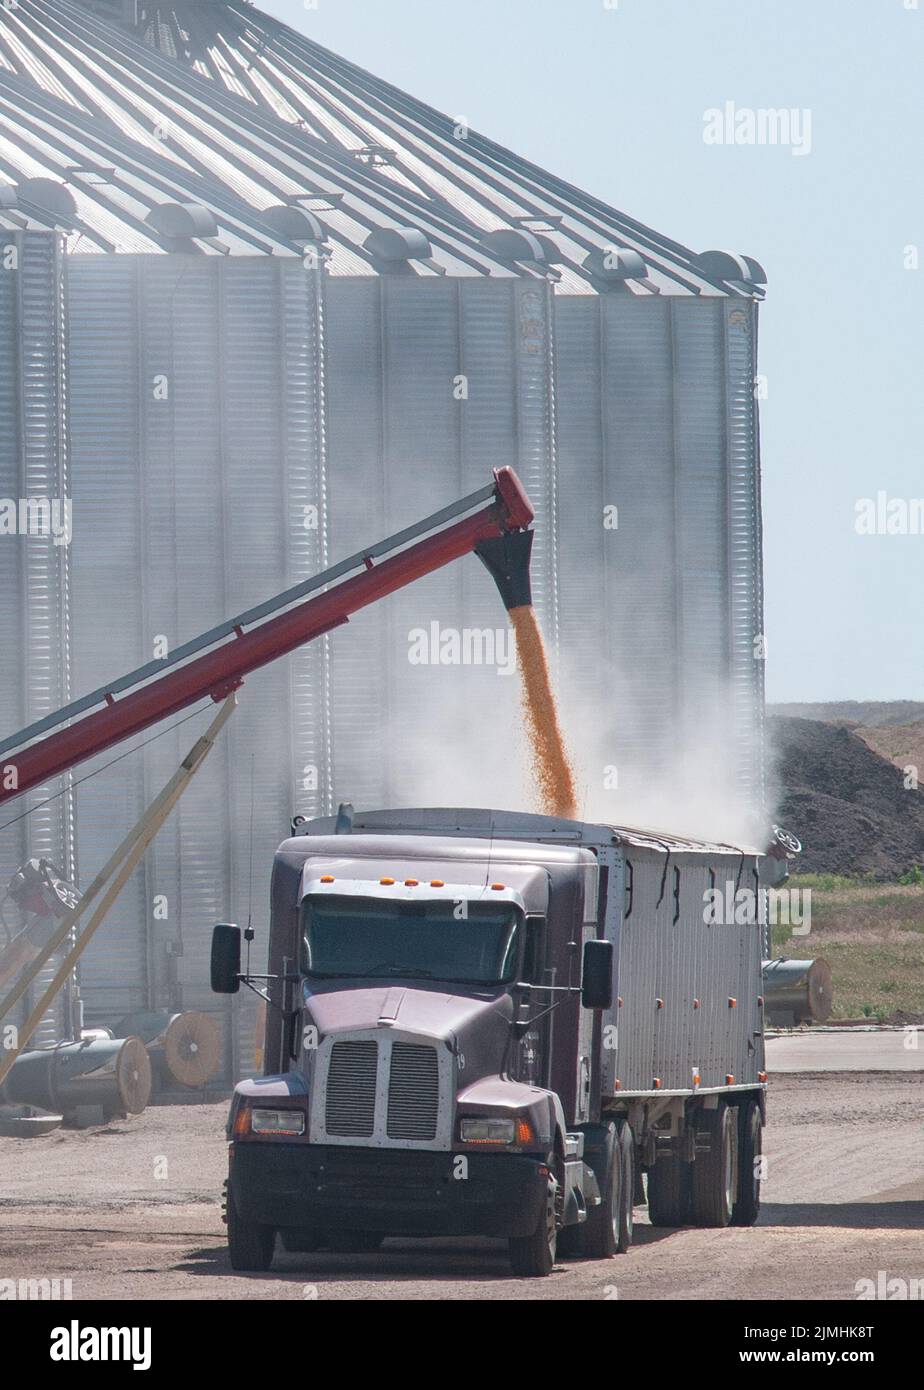 Corn seed being loaded into a grain transport truck Stock Photo